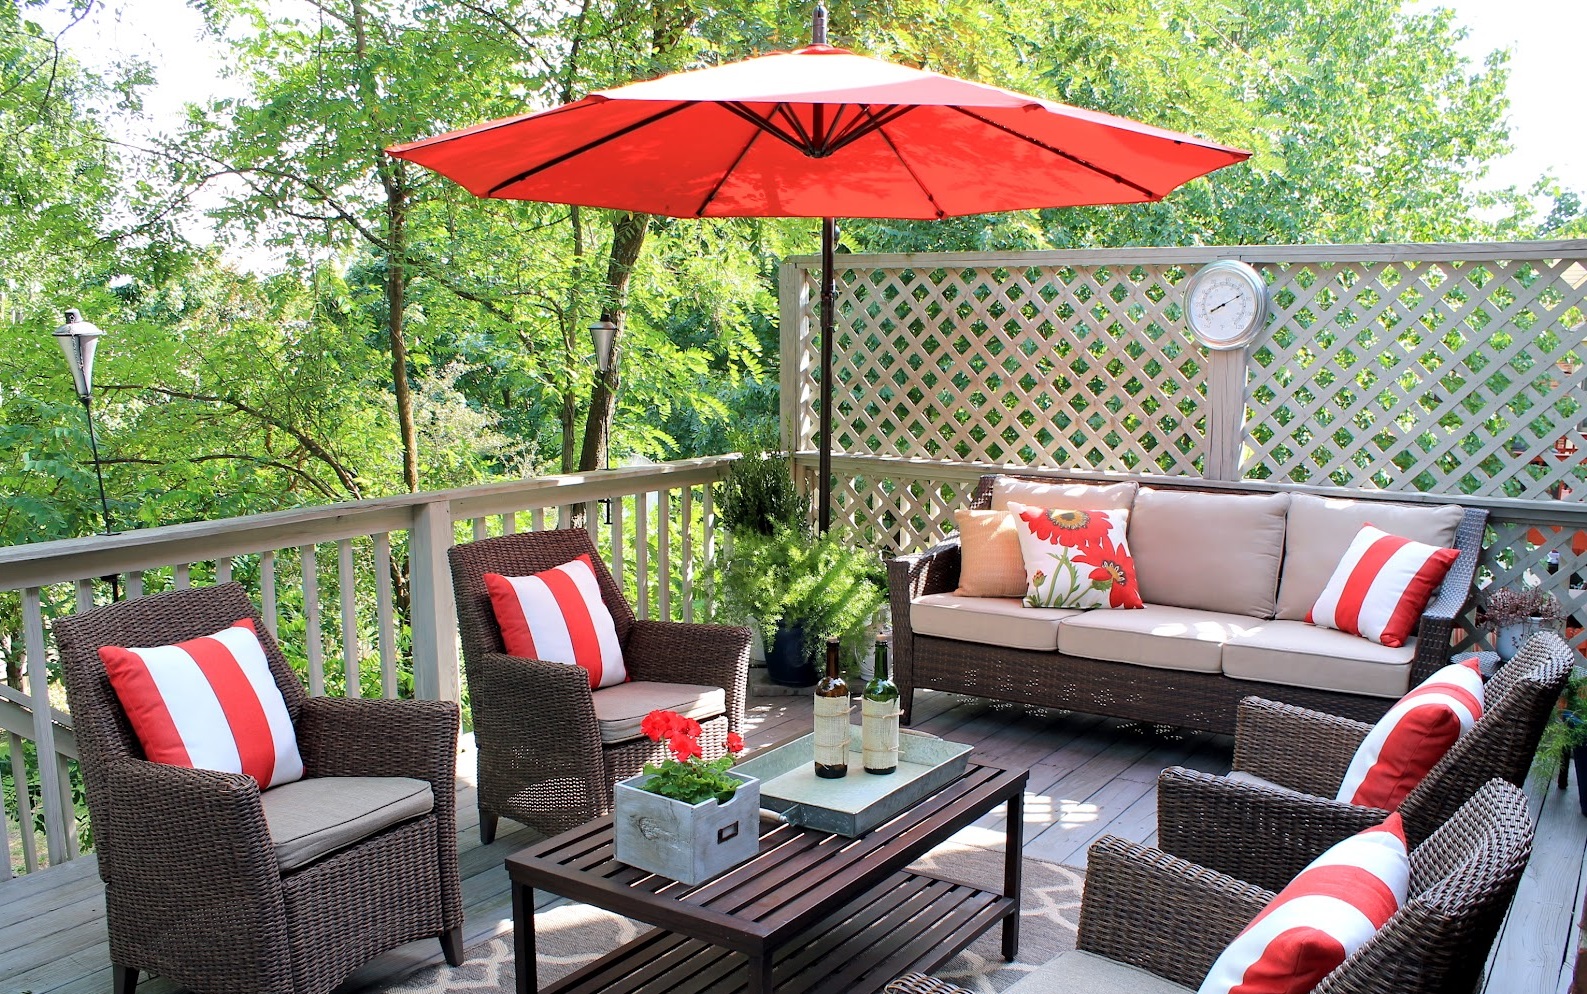 Parasol Design In  Outdoor  Pottery Barn Outdoor Furniture Equipping Breezy Patio 